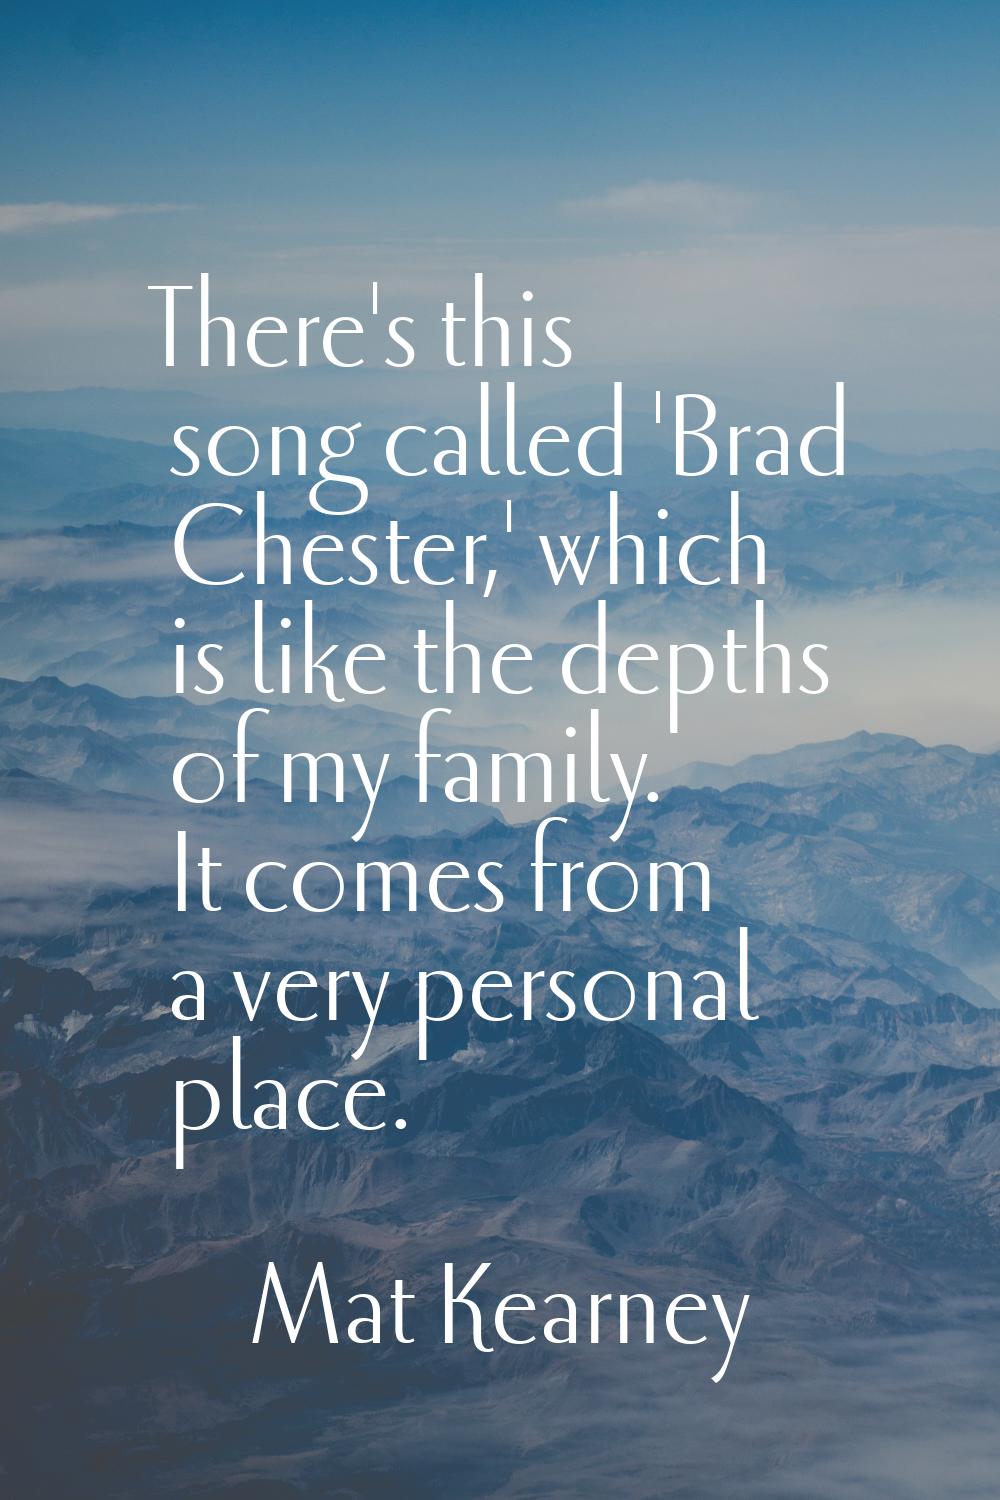 There's this song called 'Brad Chester,' which is like the depths of my family. It comes from a ver